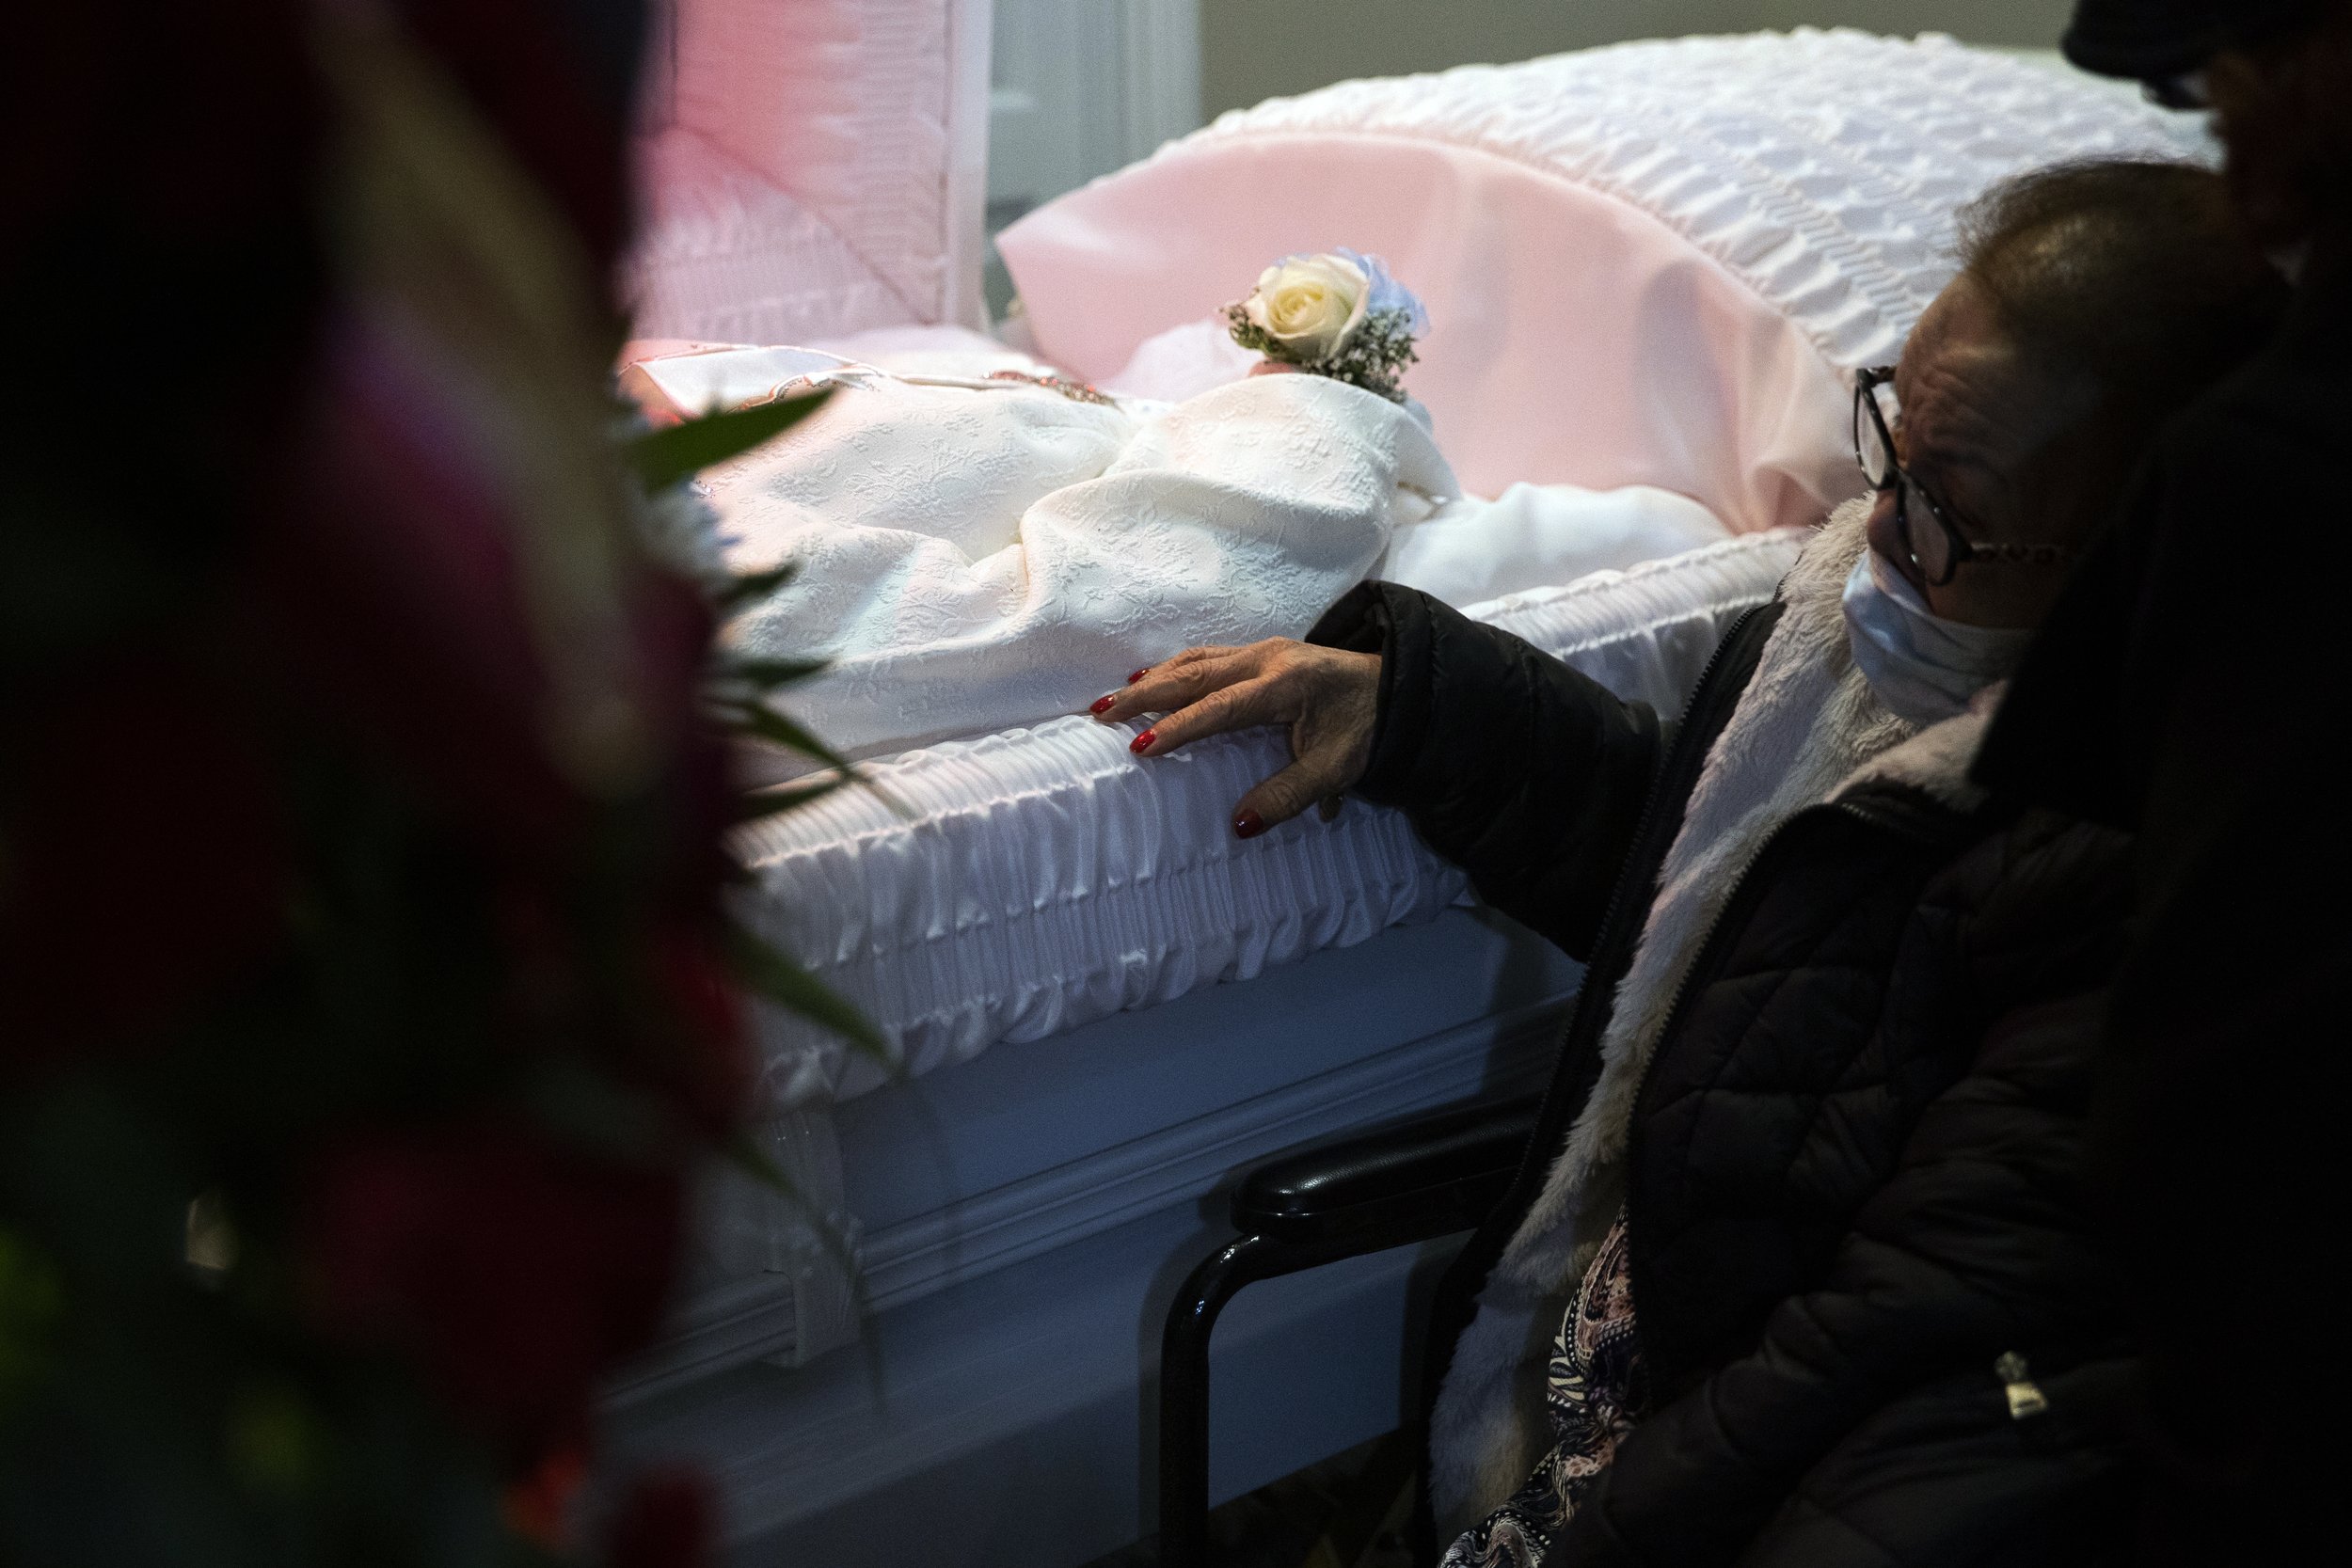  Family members pay their respects to Mildred Perry, who died from COVID-19 on February 15 at 94 years old, at Alfonso Cannon Funeral Chapel in Philadelphia on February 23, 2021. (On assignment for the New York Times)  